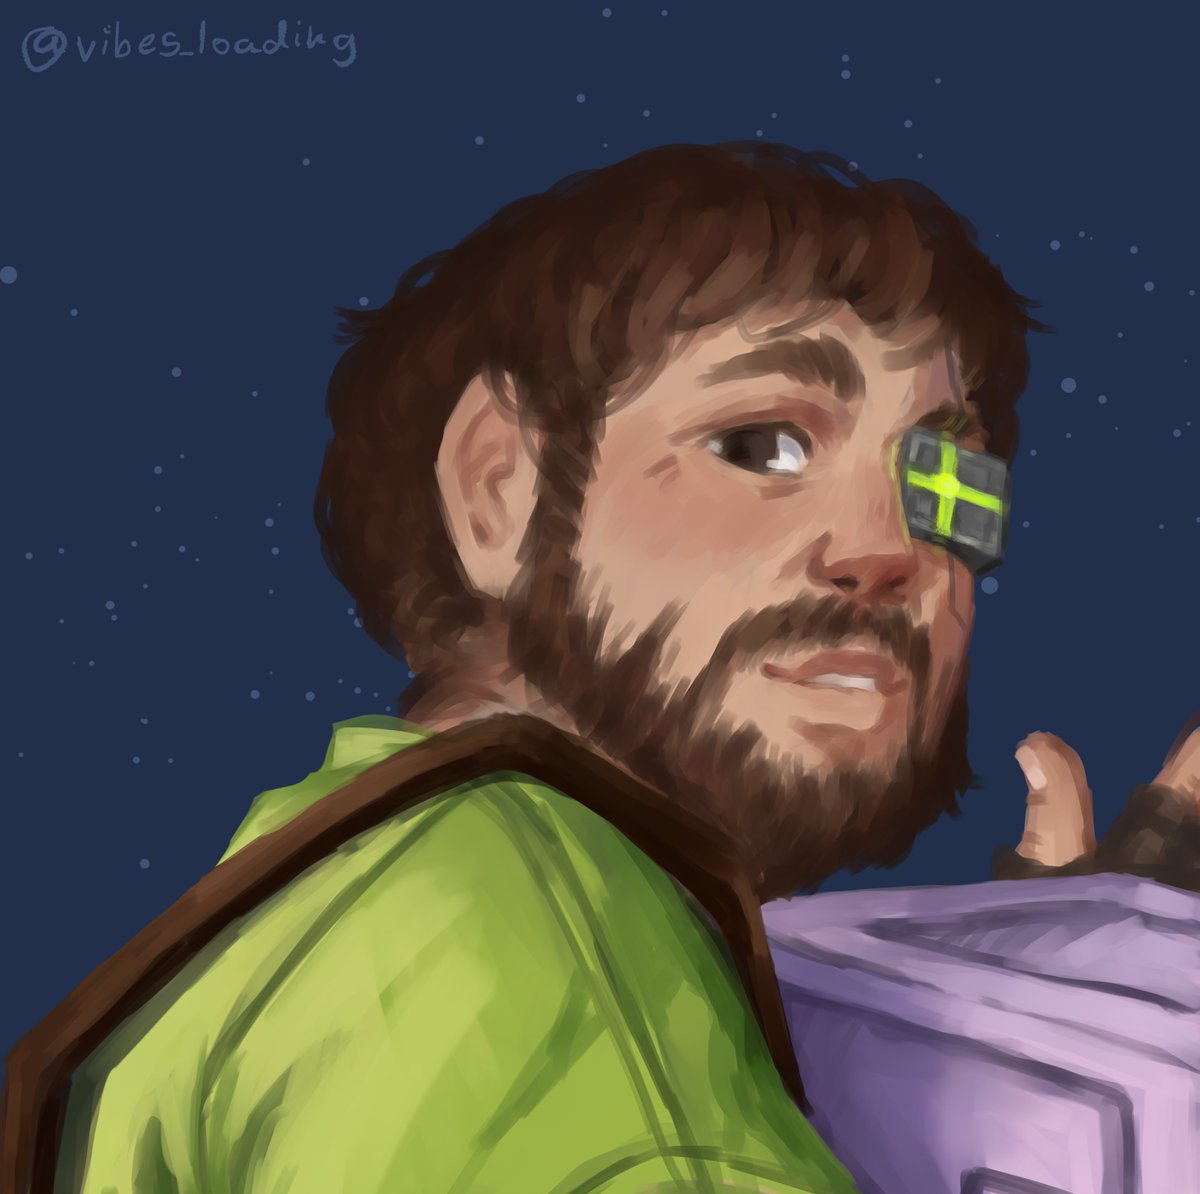 Hermit a day may is now my new excuse to practice painting 

#hermitaday #ethoslabfanart #iskallfanart